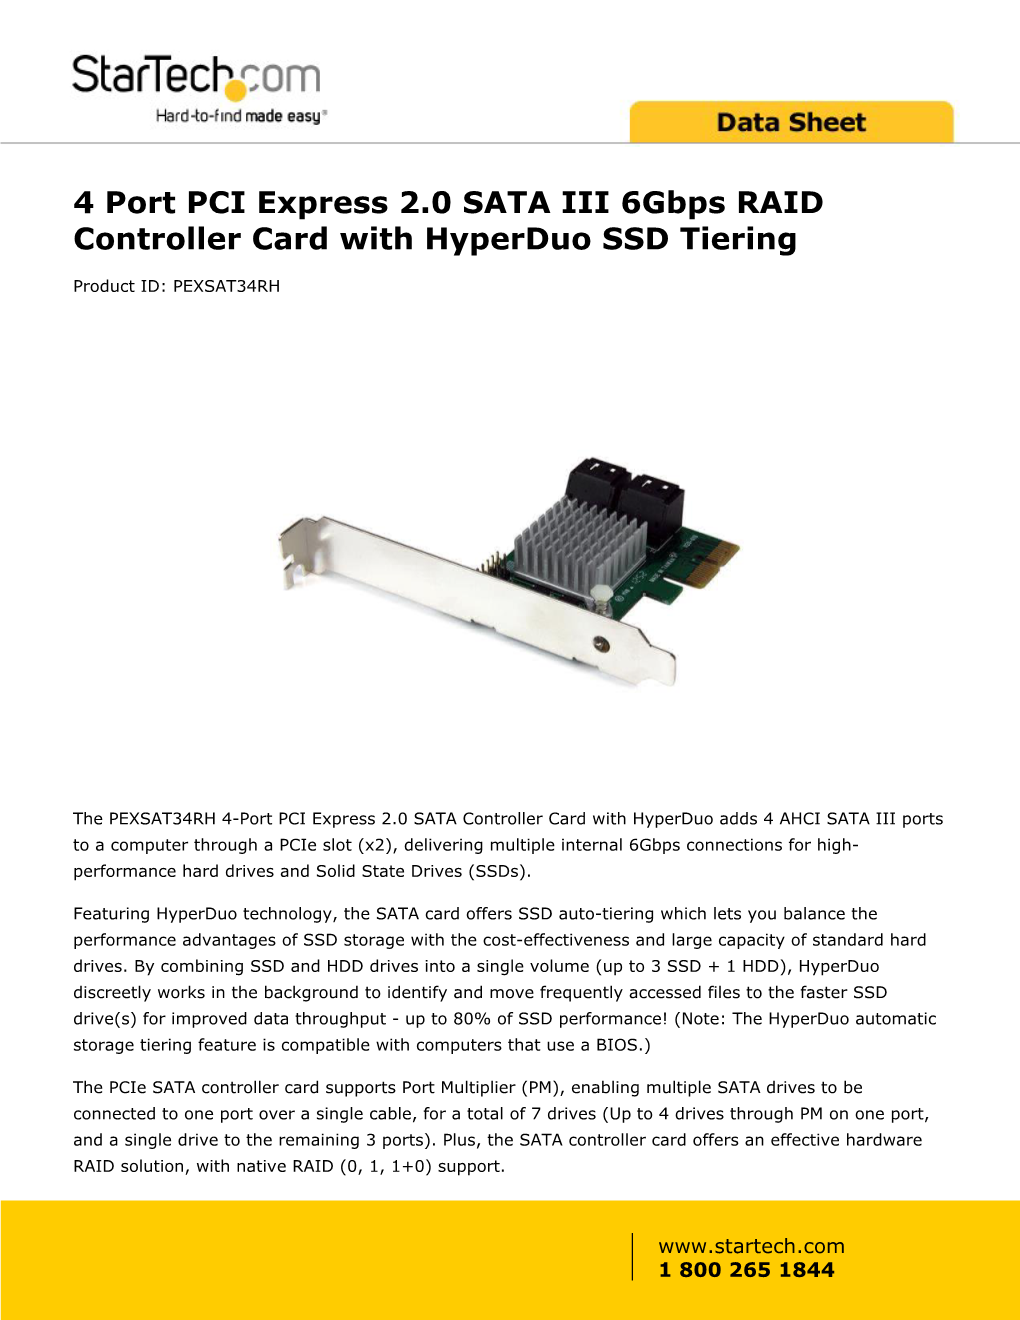 4 Port PCI Express 2.0 SATA III 6Gbps RAID Controller Card with Hyperduo SSD Tiering